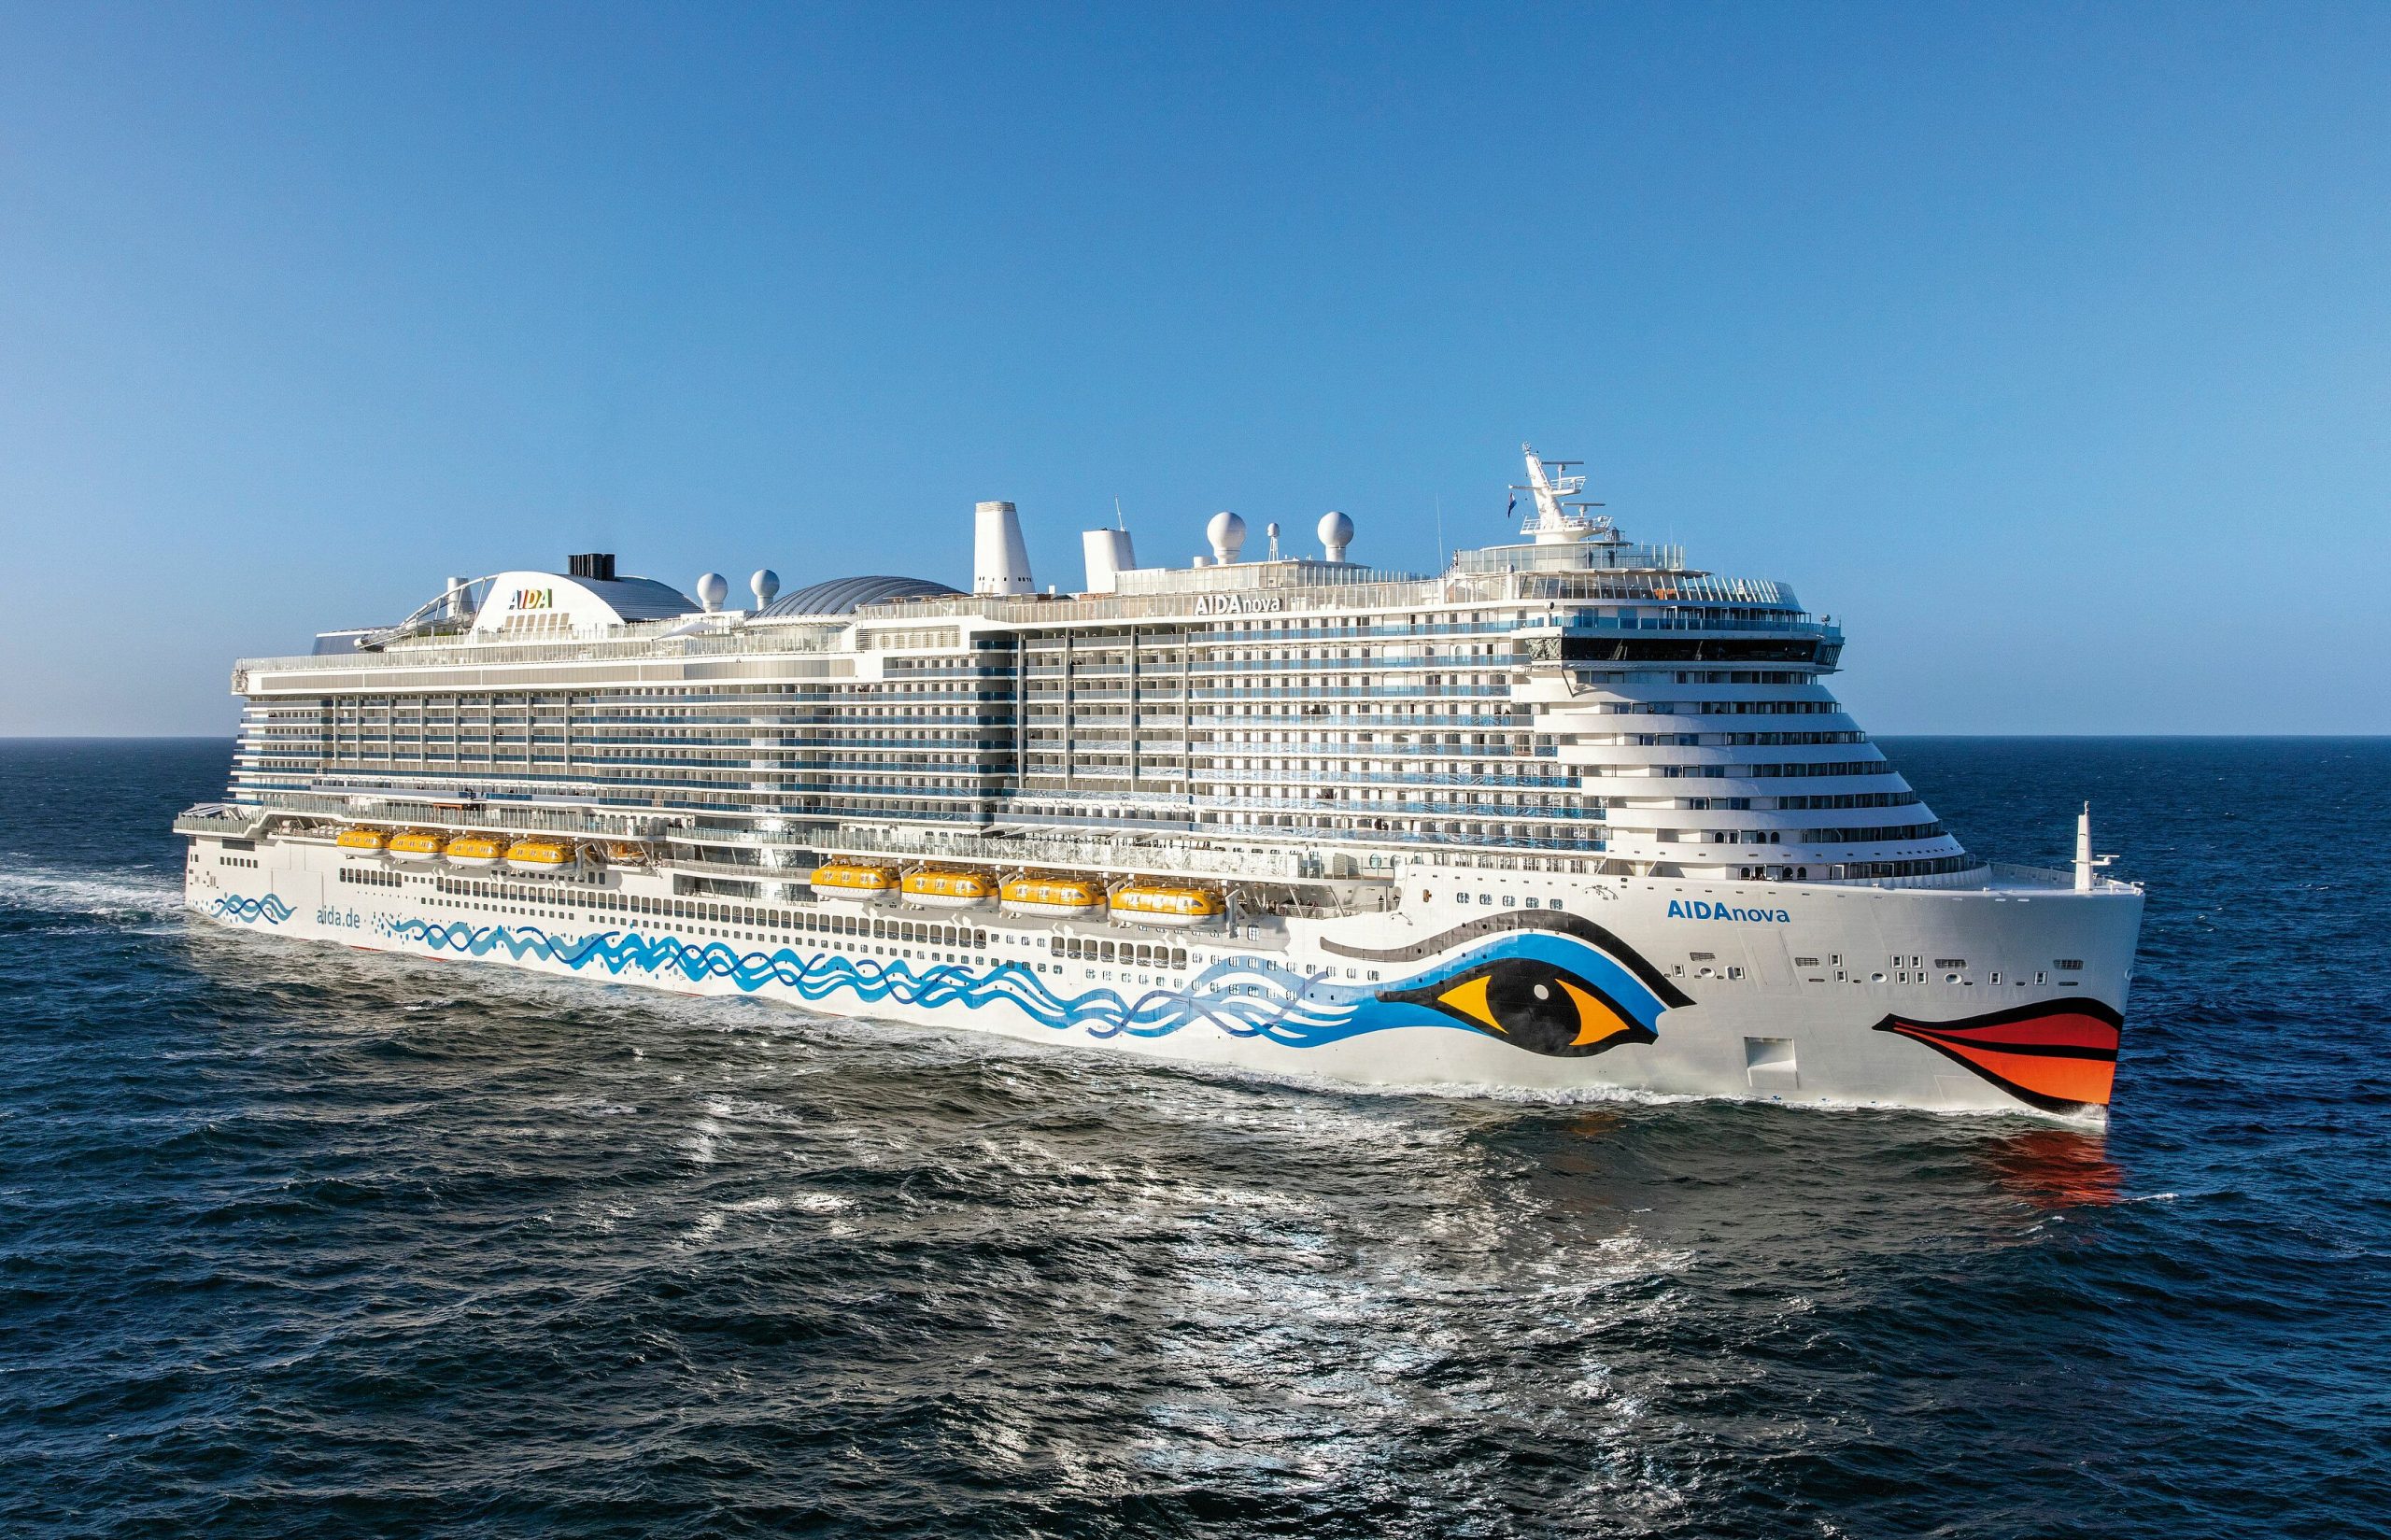 The new Aida Nova, powered by liquefied natural gas, was handed over in December 2018. Photo: Aida Cruises